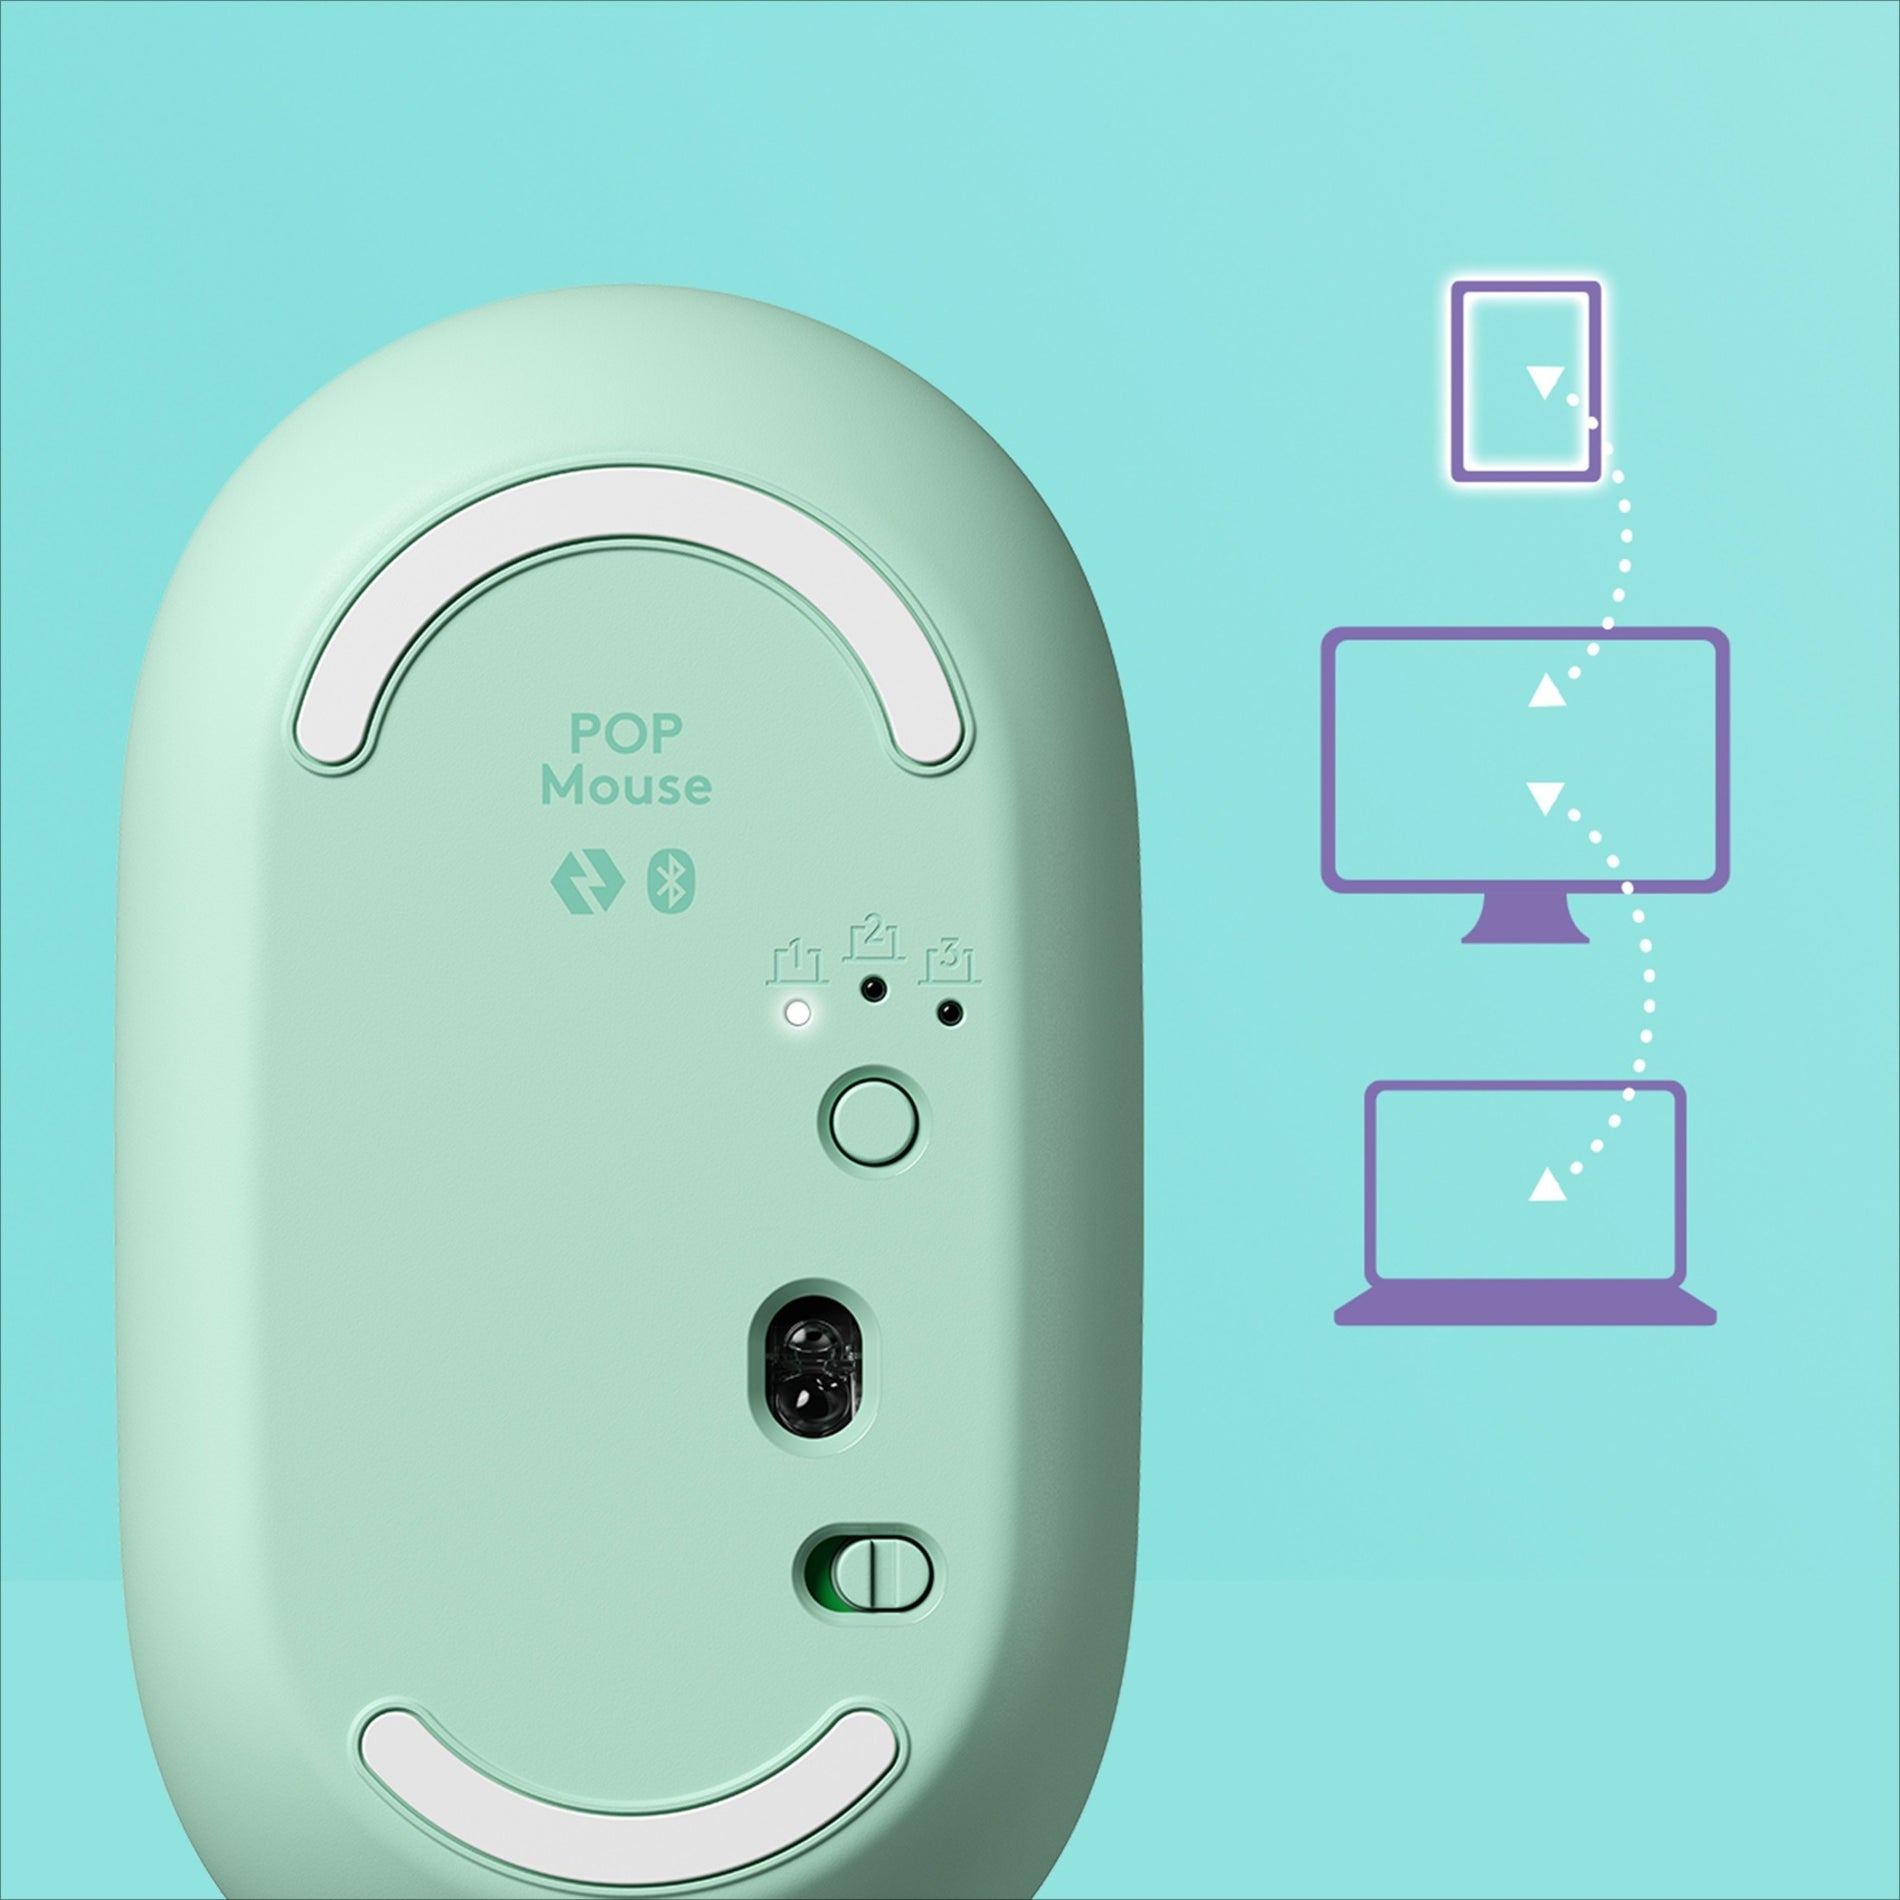 Logitech 910-006544 POP Mouse with emoji - Daydream Mint, Wireless Bluetooth Mouse with Scroll Wheel